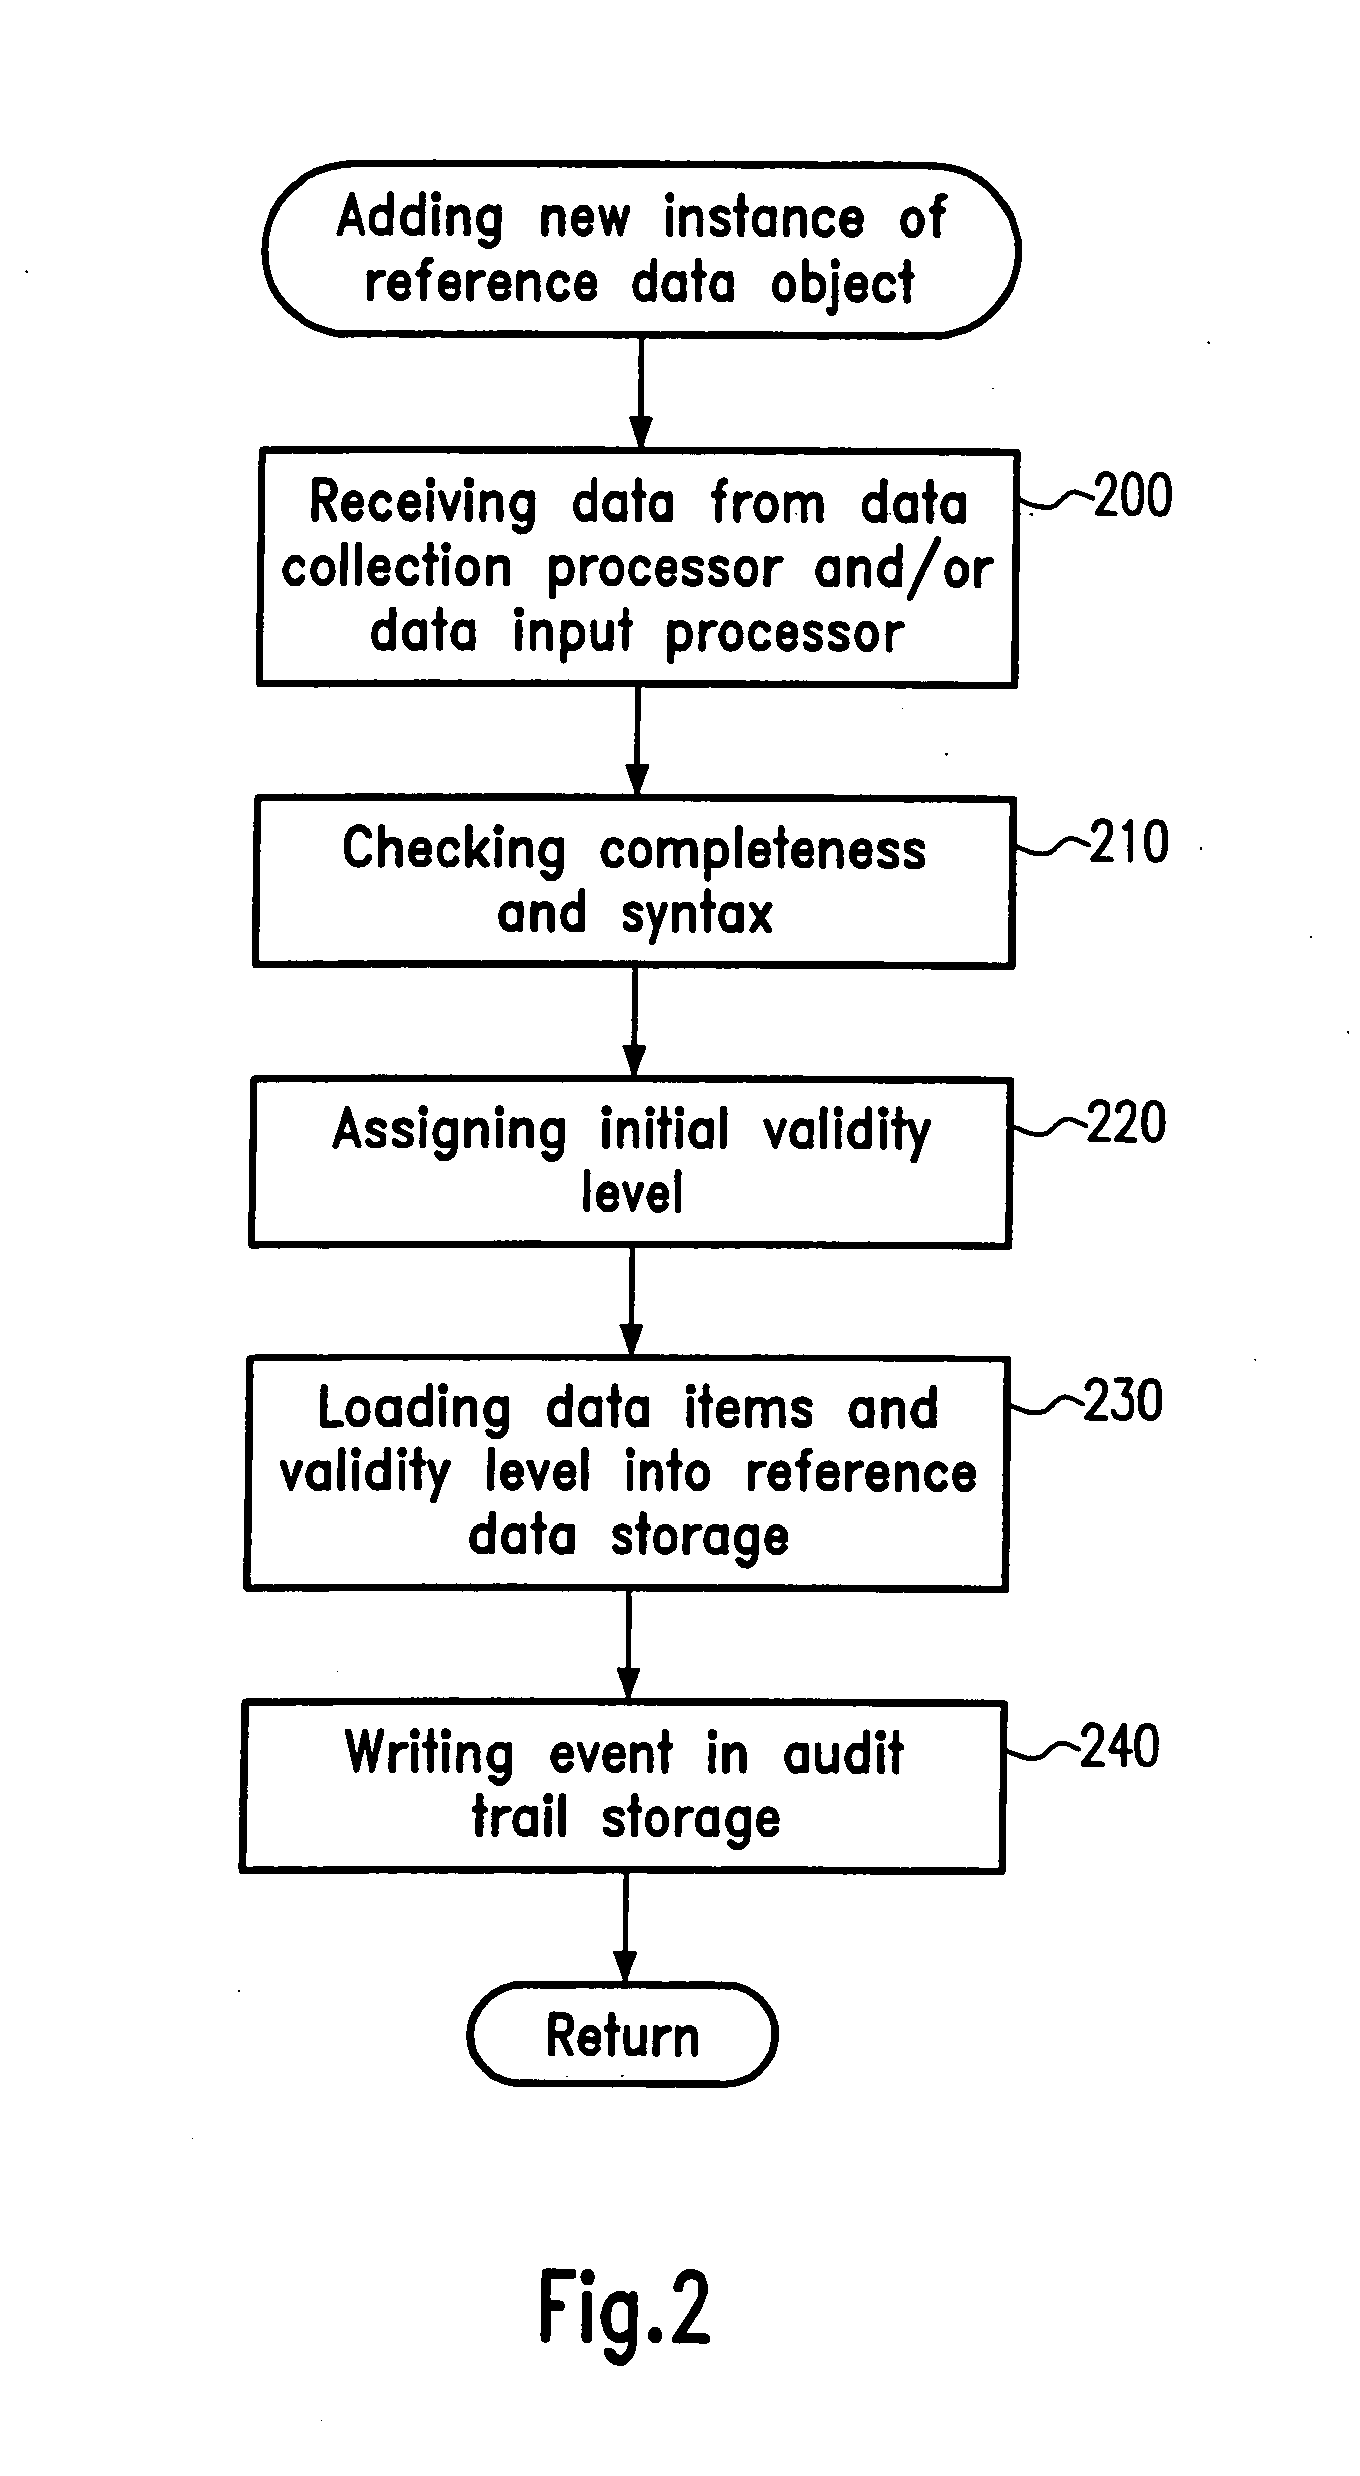 Data validity control in straight-through processing systems